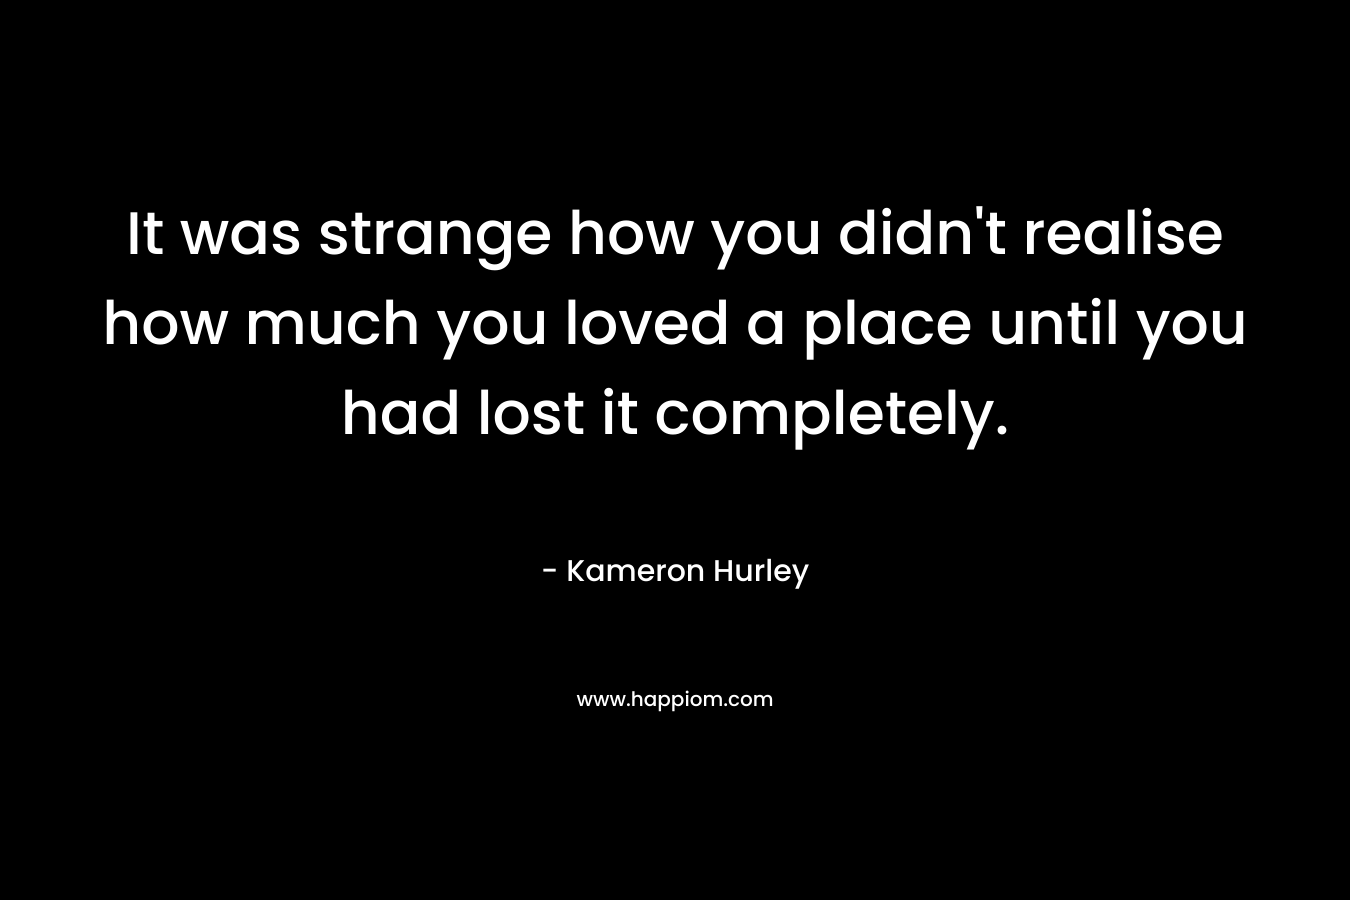 It was strange how you didn't realise how much you loved a place until you had lost it completely.